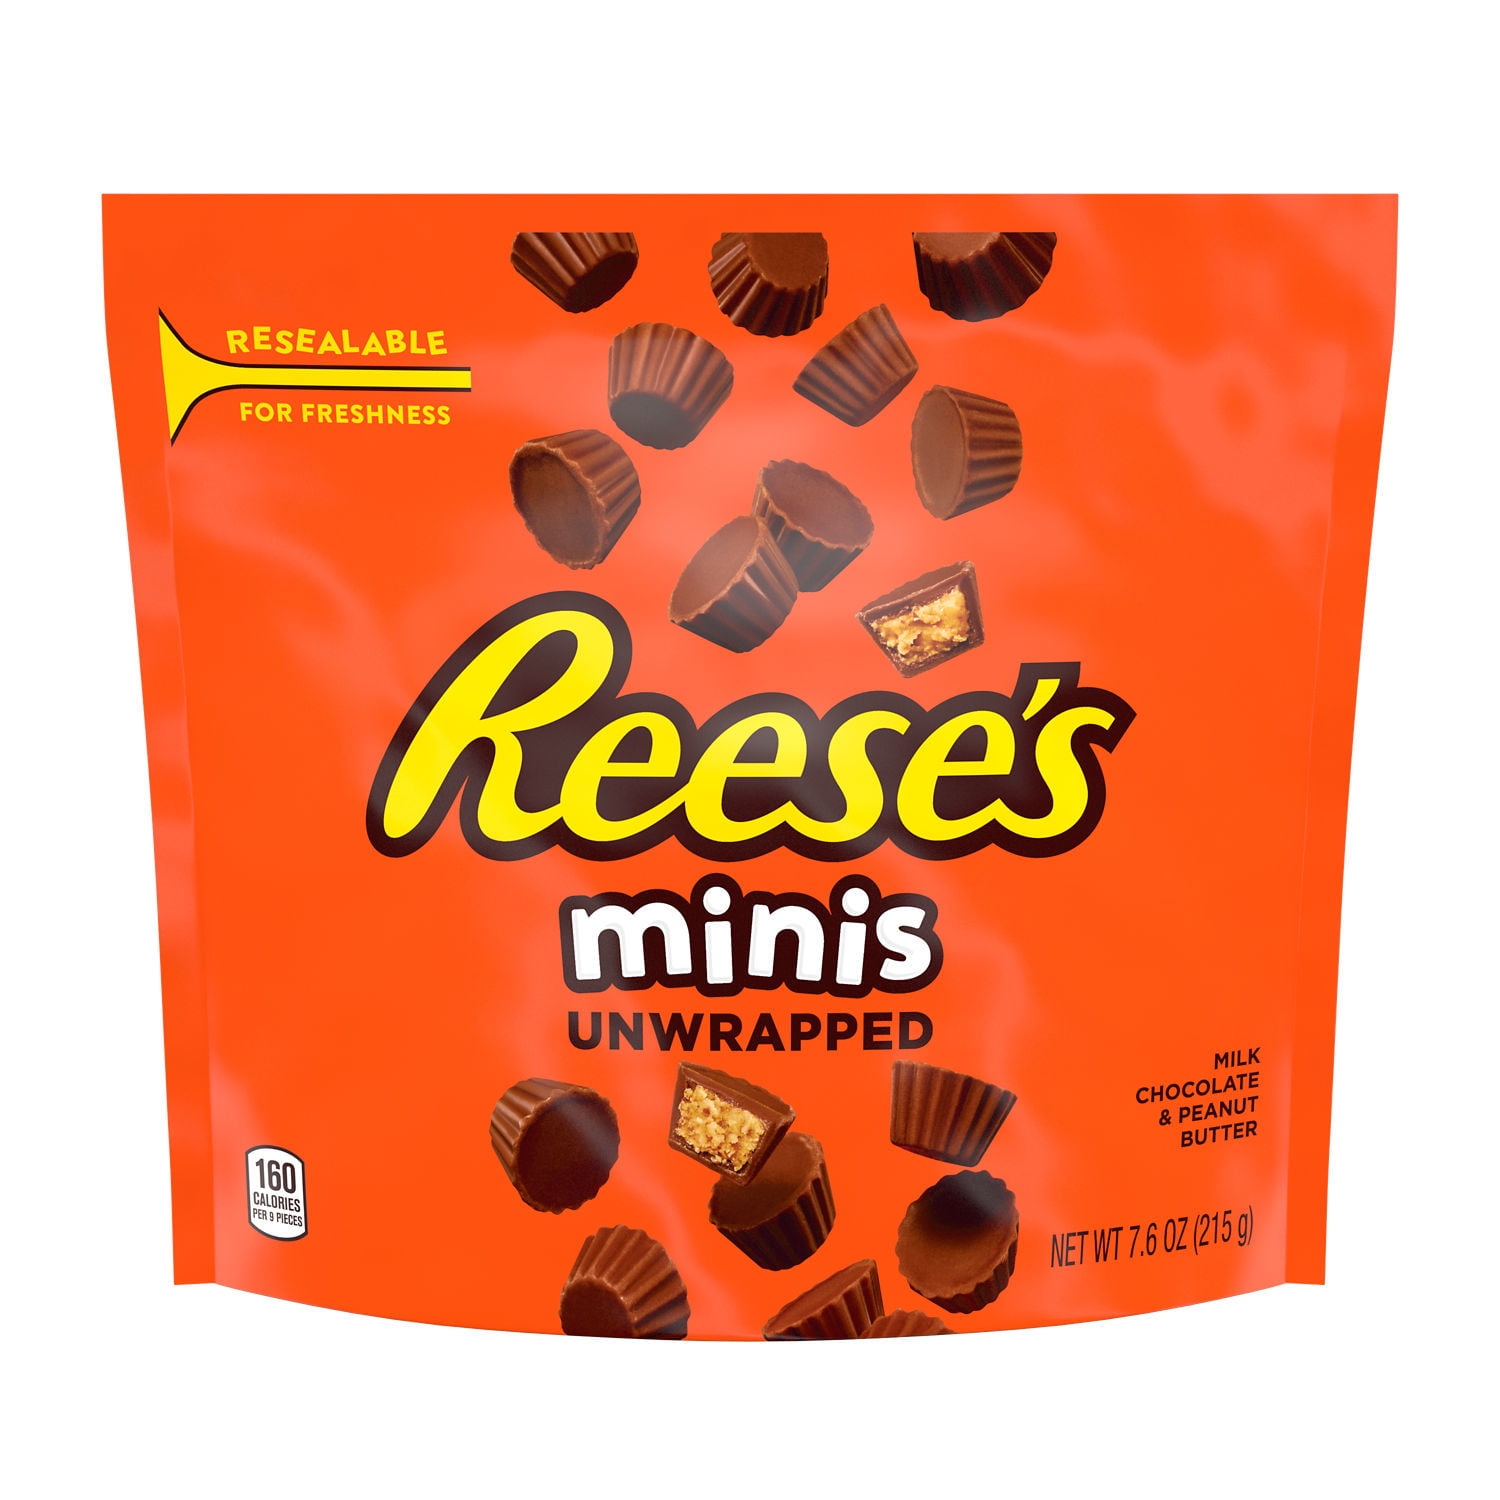 REESE'S Minis Milk Chocolate Unwrapped, Gluten Free Peanut Butter Cups Candy Resealable Bag, 7.6 oz